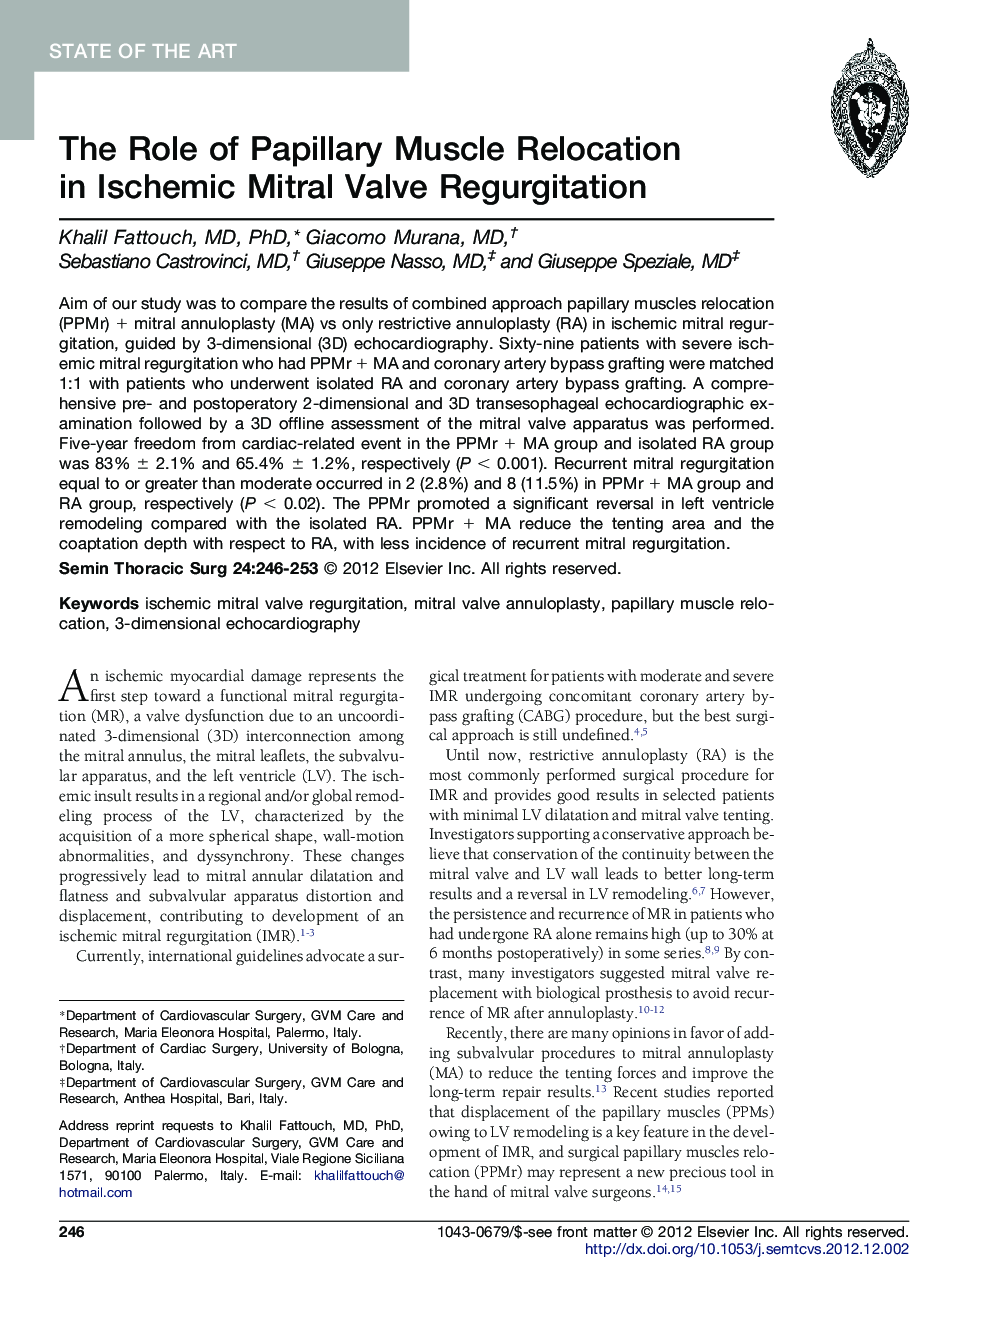 The Role of Papillary Muscle Relocation in Ischemic Mitral Valve Regurgitation